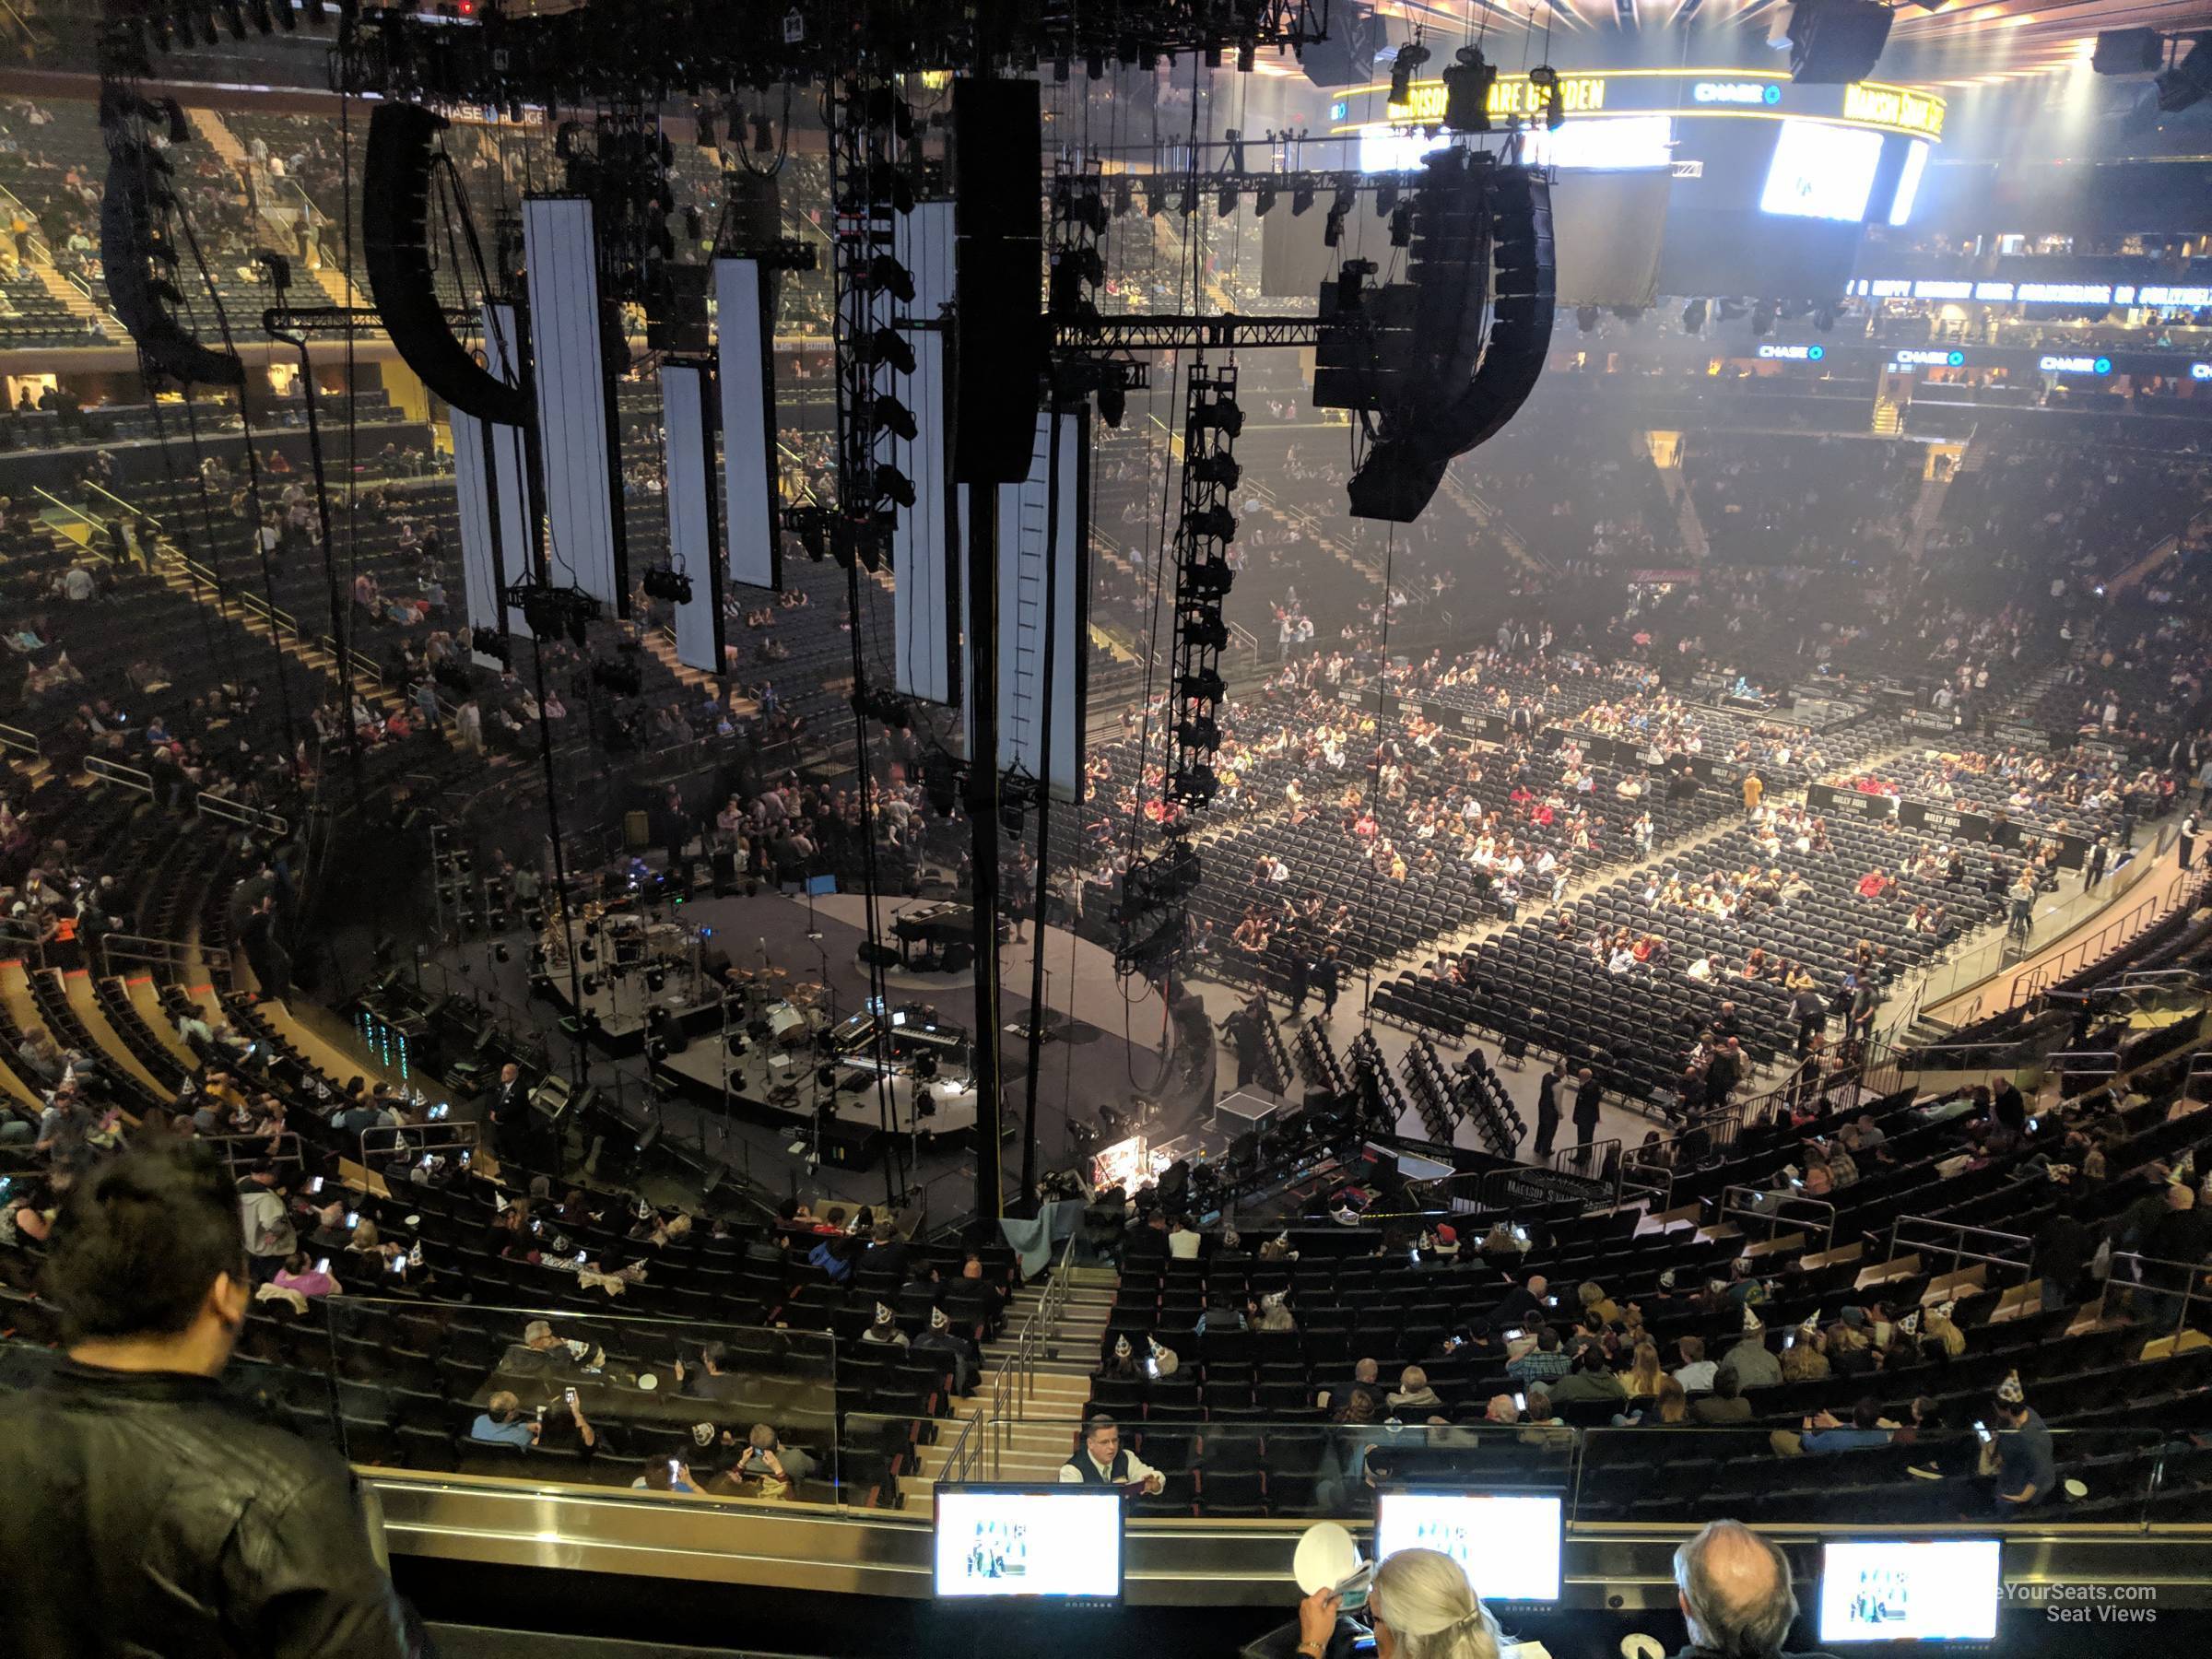 section 220, row 5 seat view  for concert - madison square garden